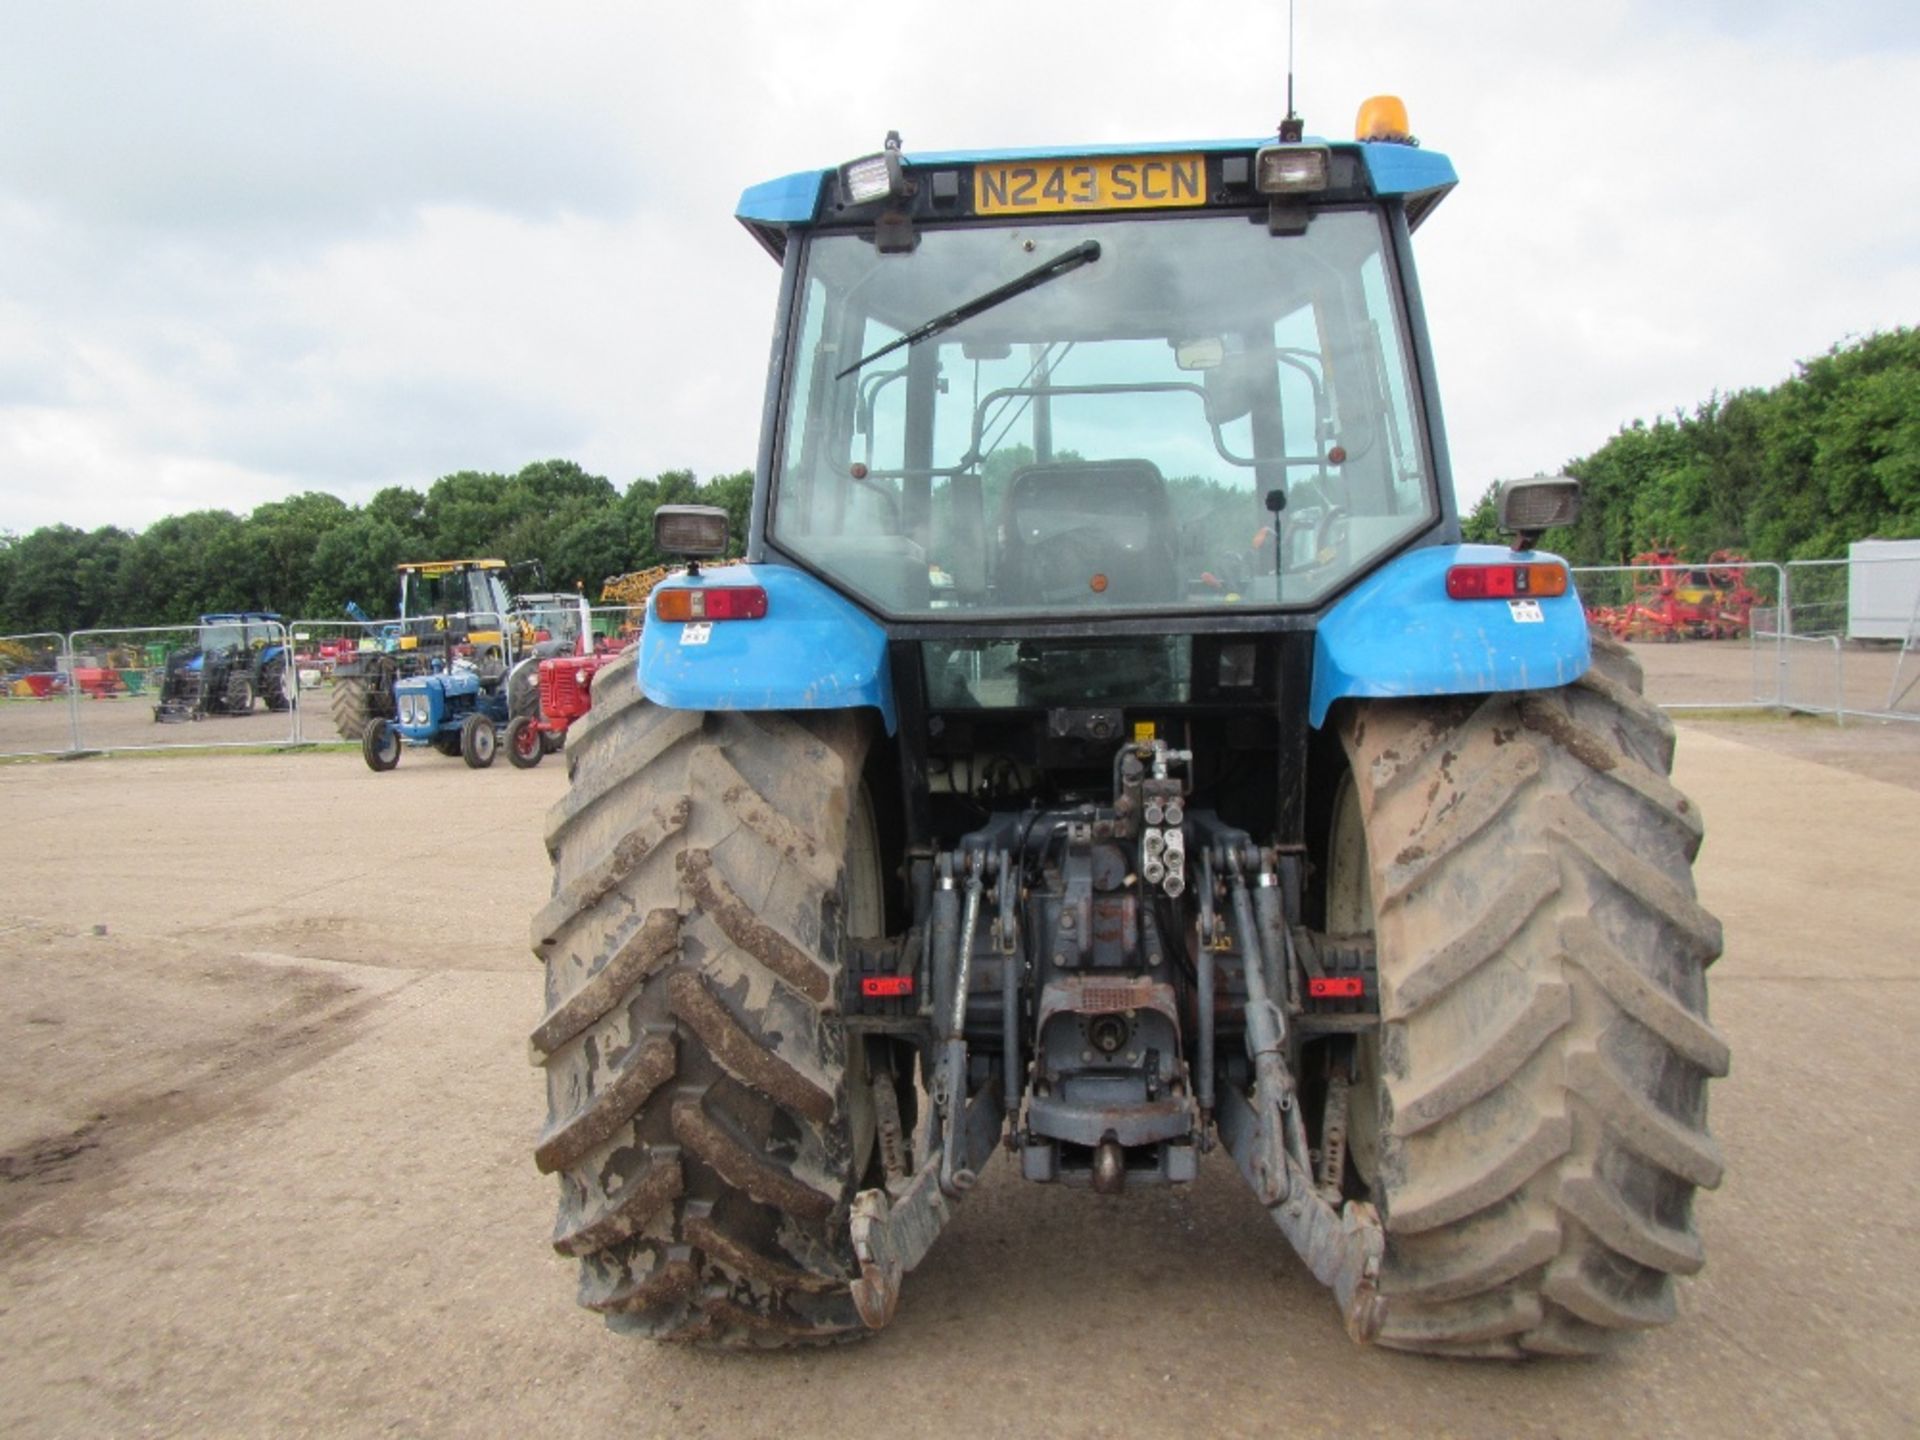 New Holland 8340 SLE 4wd Tractor. V5 will be supplied Reg. No. N243 SCN Ser No 025324B - Image 6 of 17